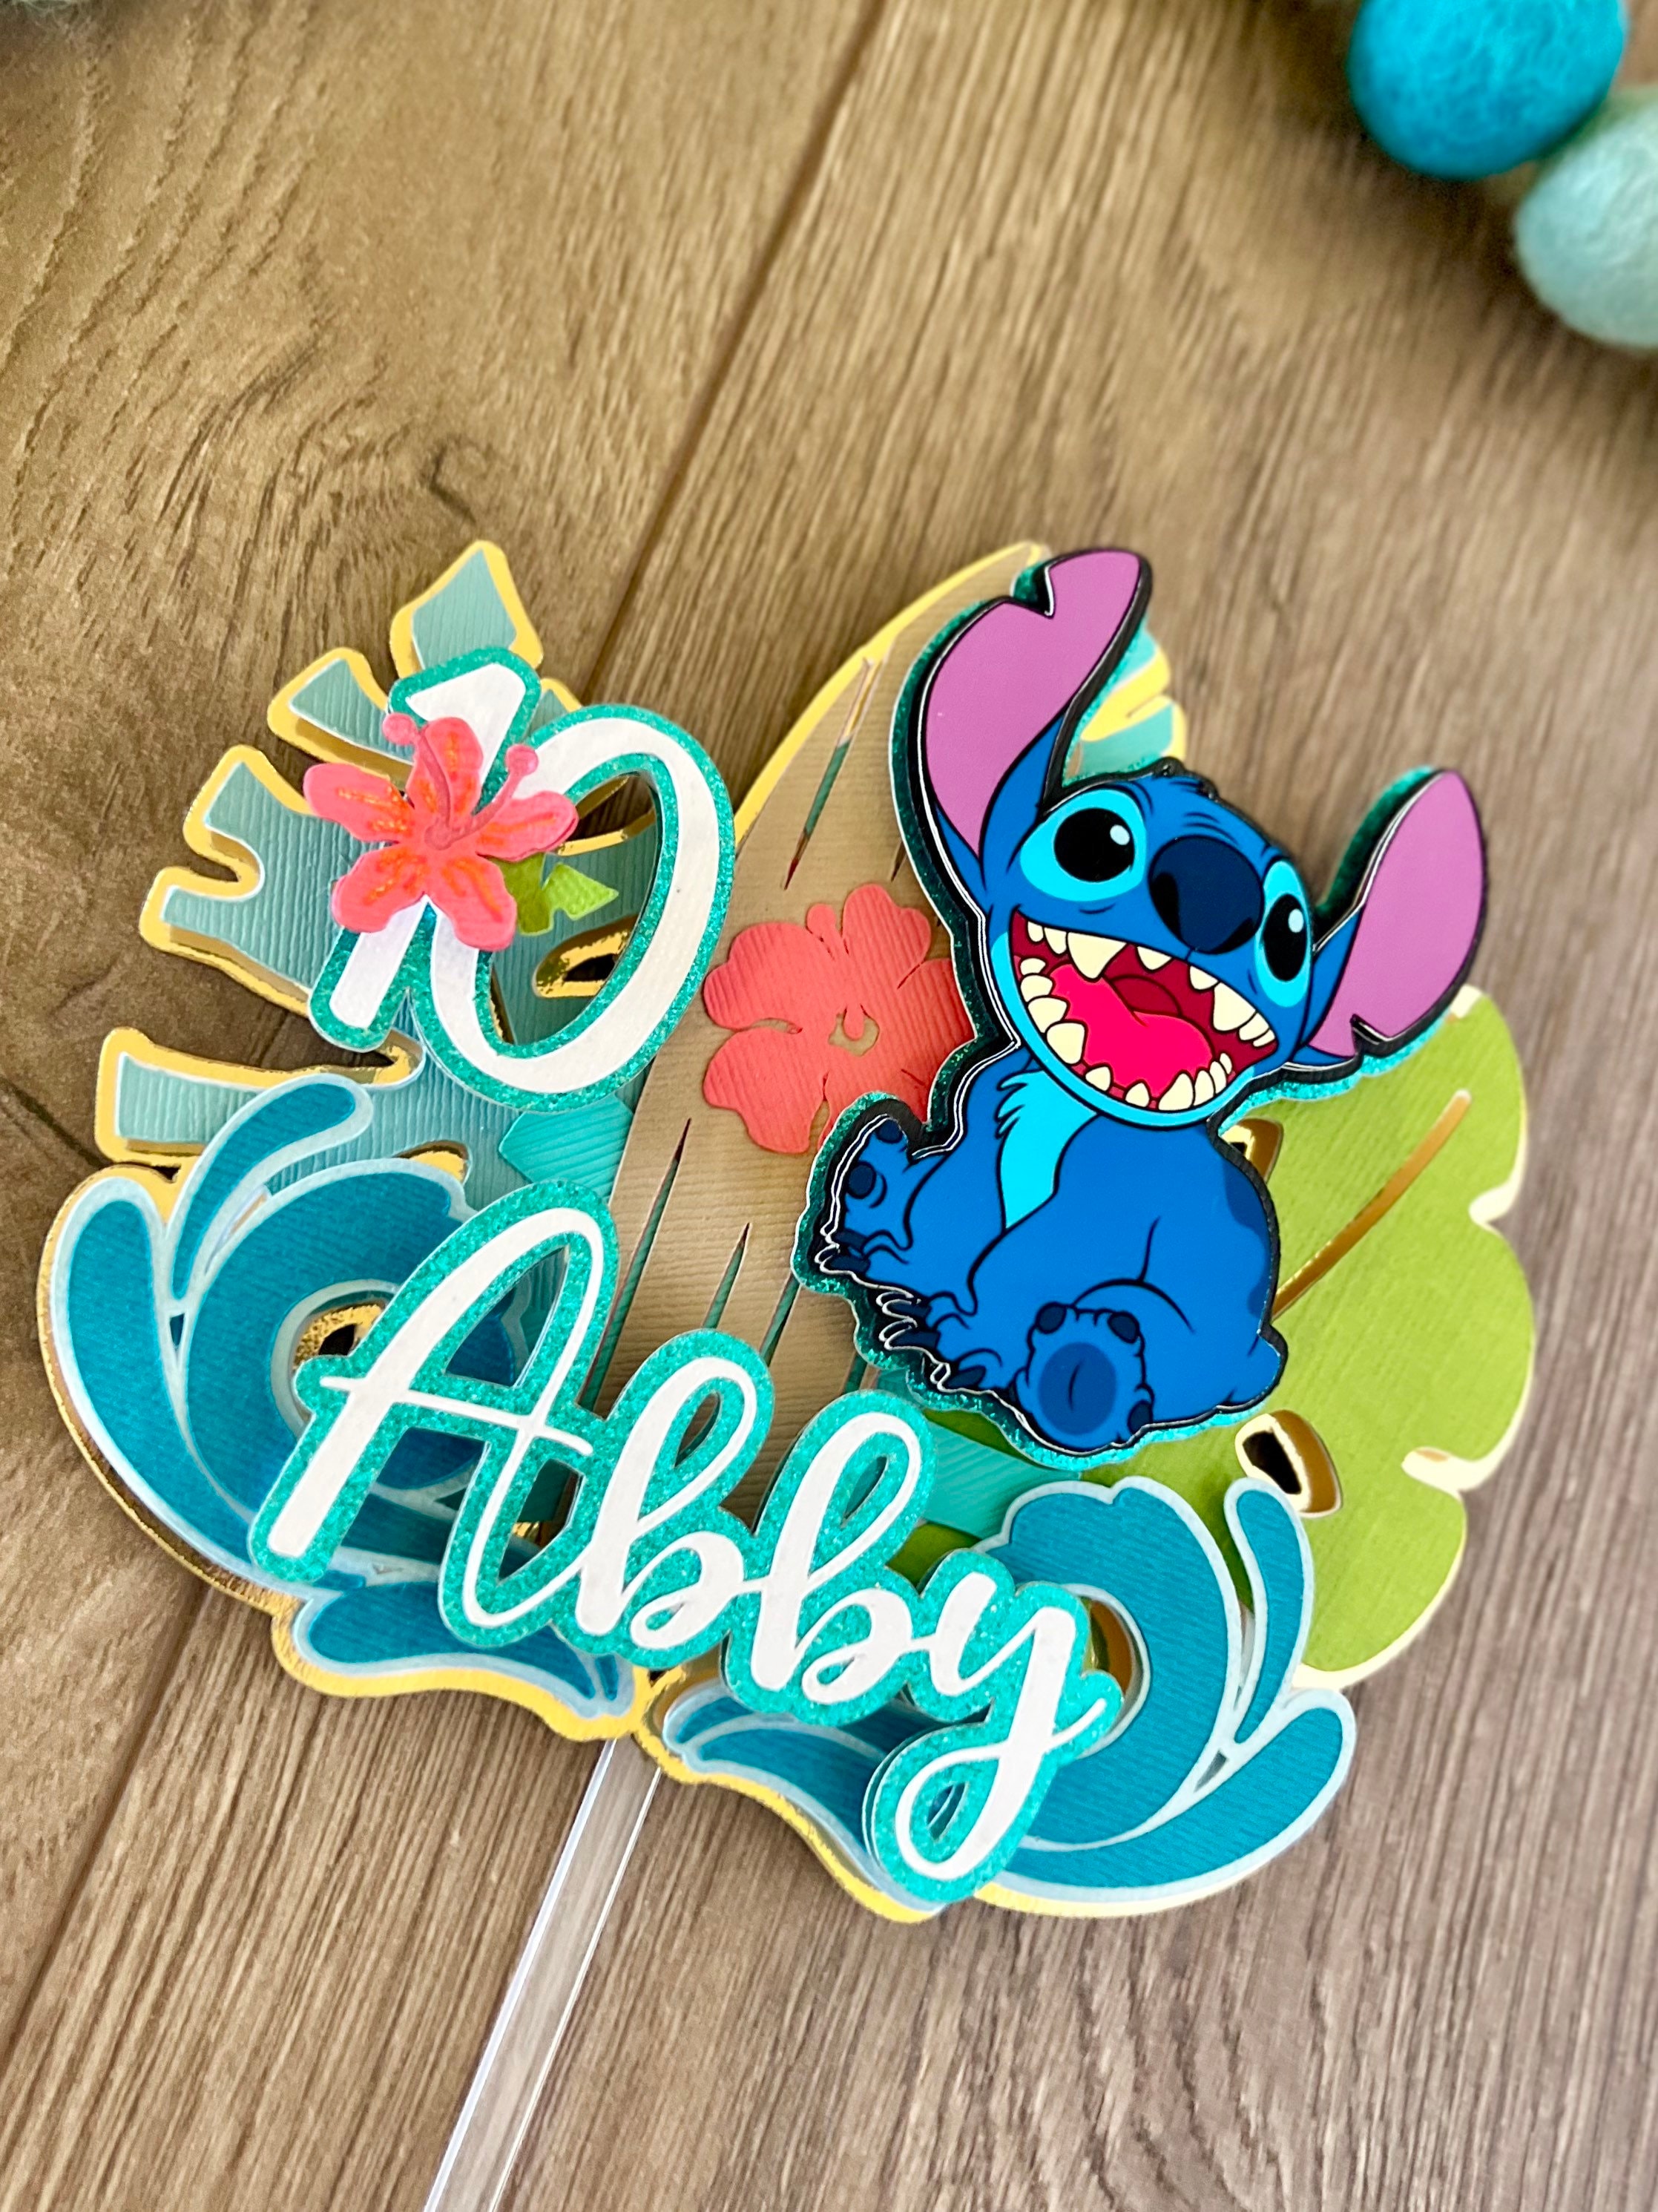 Stitch Cupcake Toppers, Birthday Party Cupcake Toppers